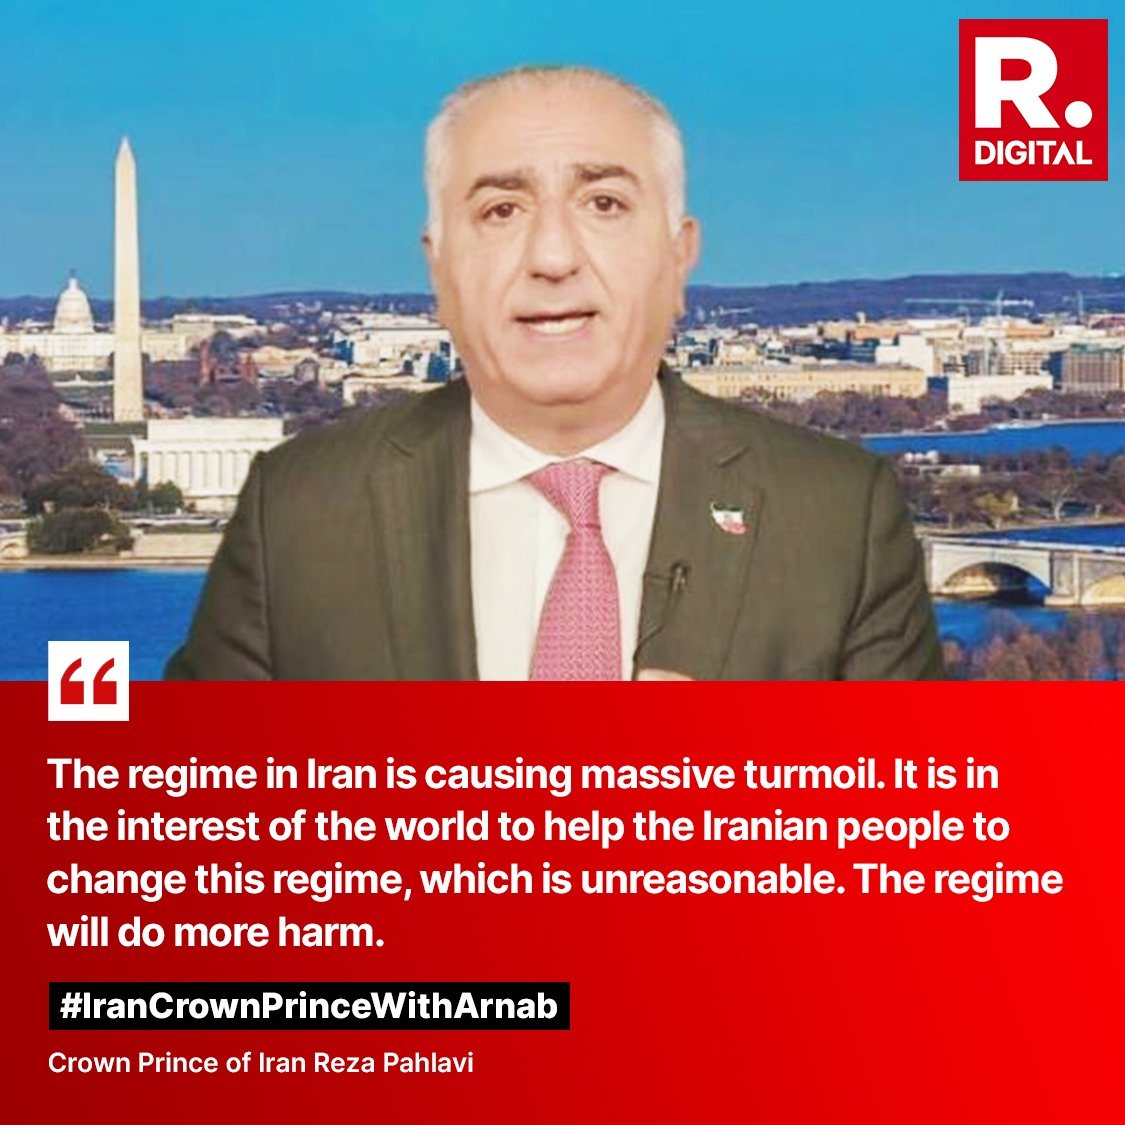 MEGA WORLD EXCLUSIVE #IranCrownPrinceWithArnab | 'People from across the world are supporting the freedom of the Iranians', says Crown Prince of Iran Reza Pahlavi (@PahlaviReza) on Nation Wants to Know Watch the full interview here: youtube.com/watch?v=5RpbZK…